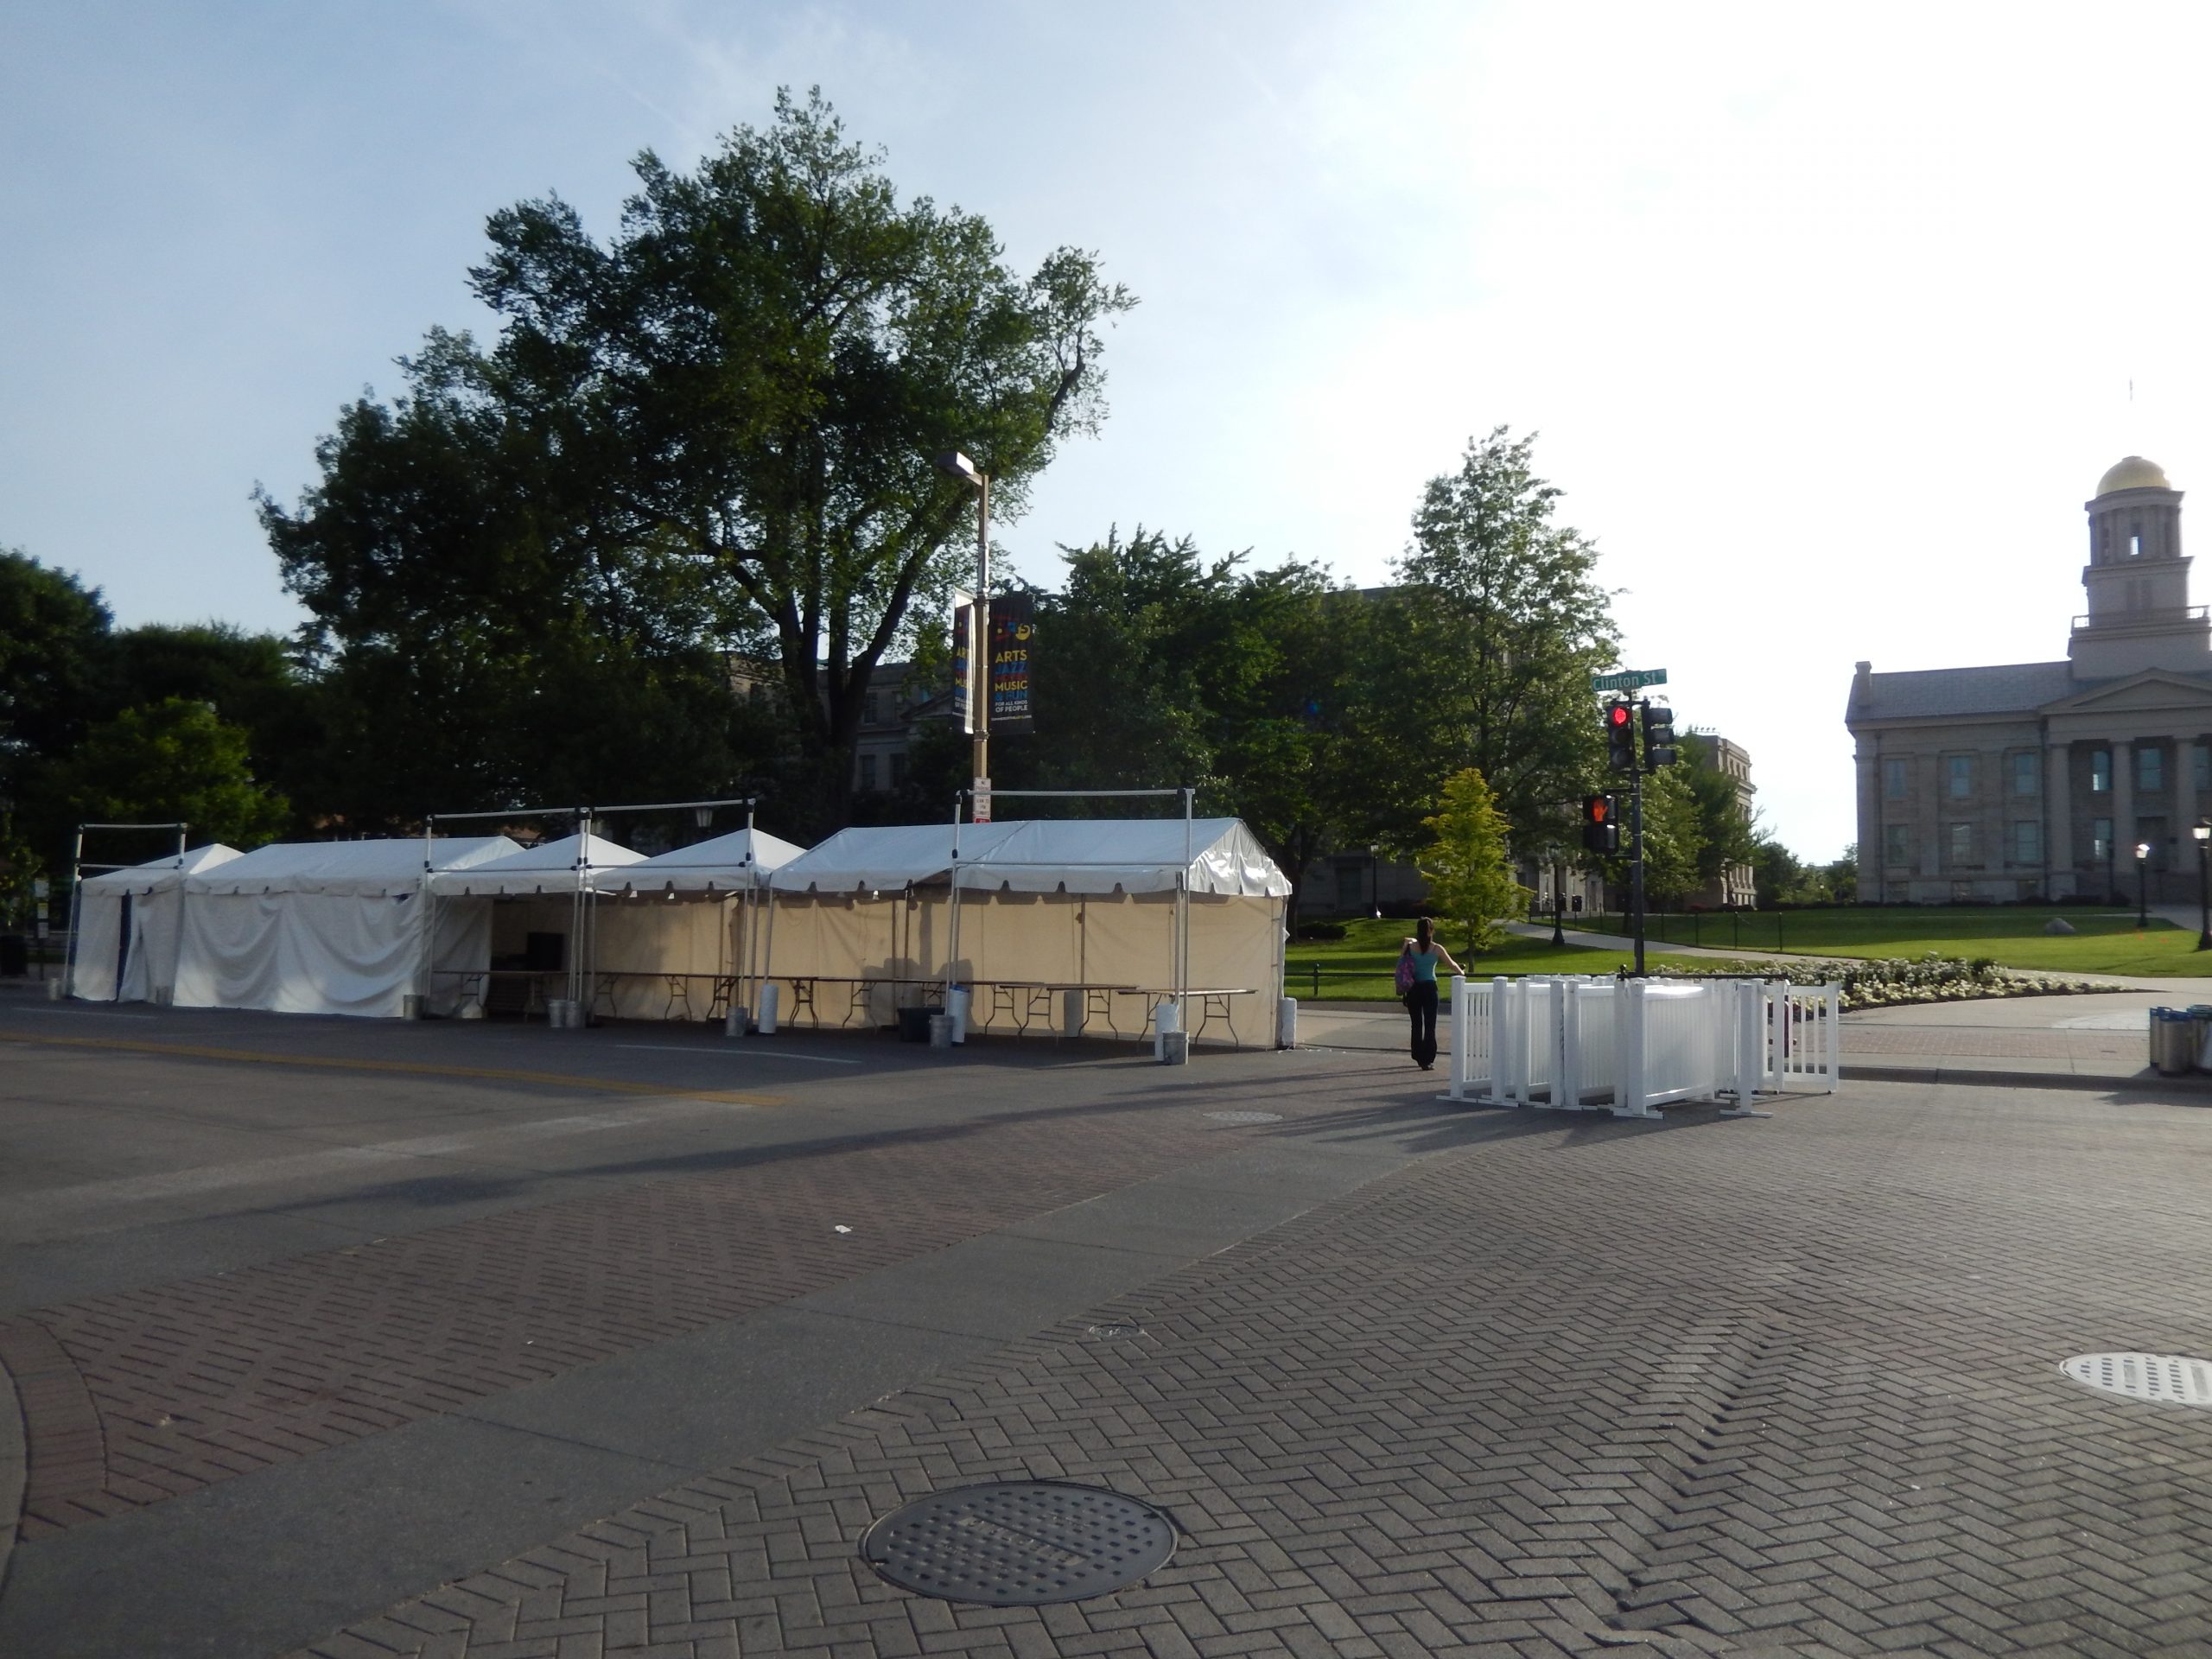 Tents with Old Capital Museum in the background